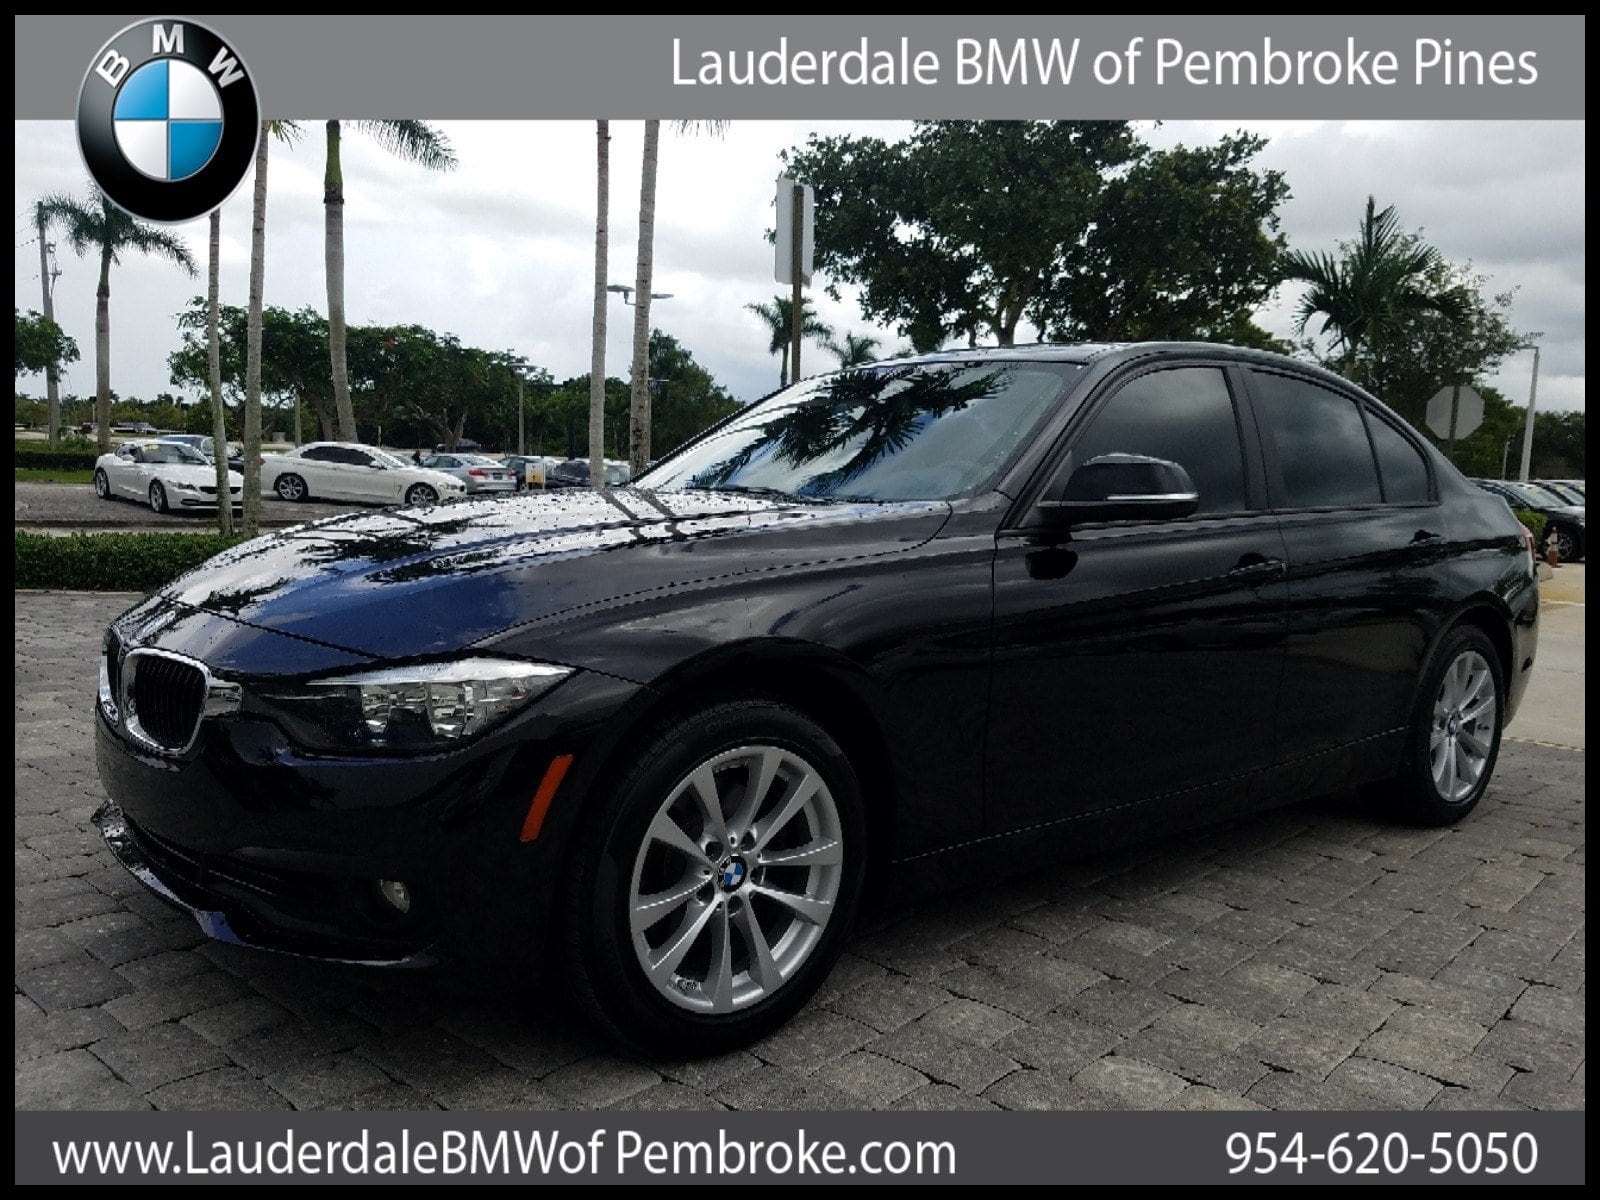 Certified Used 2016 BMW 320i i For Sale in Fort Lauderdale FL Serving North Miami Beach